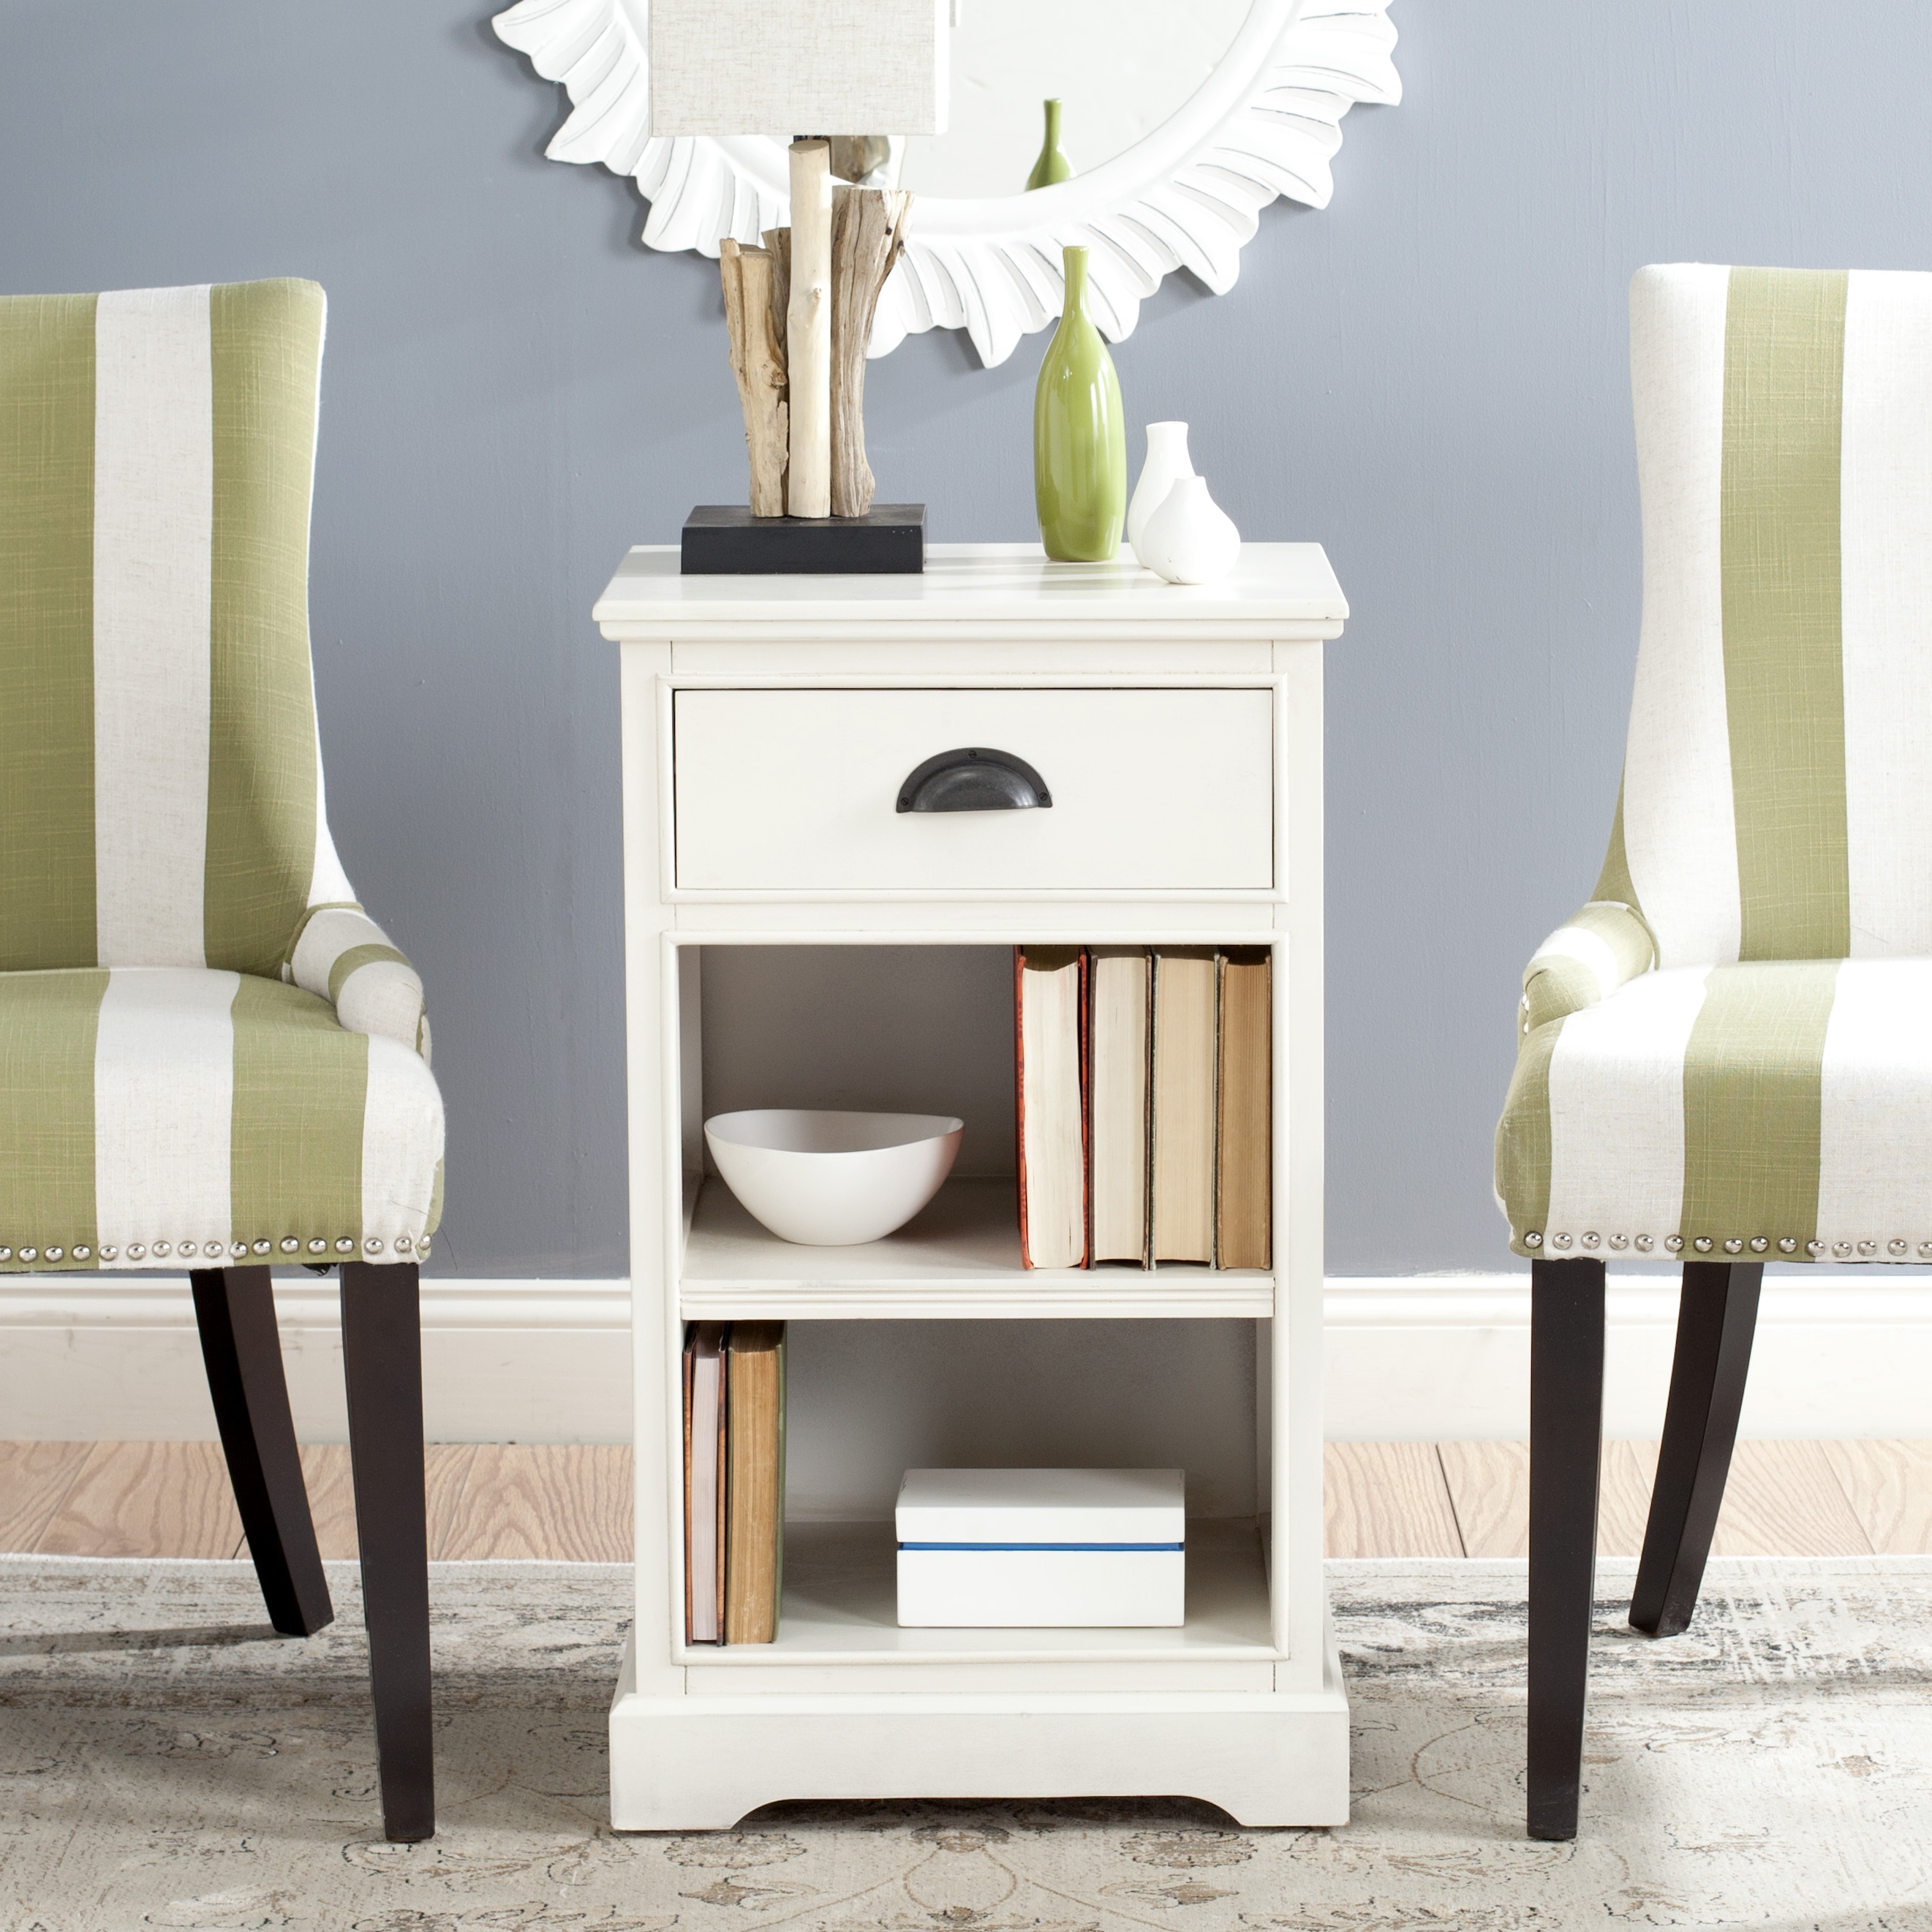 Griffin One Drawer Side Table - White - Arlo Home - Image 1